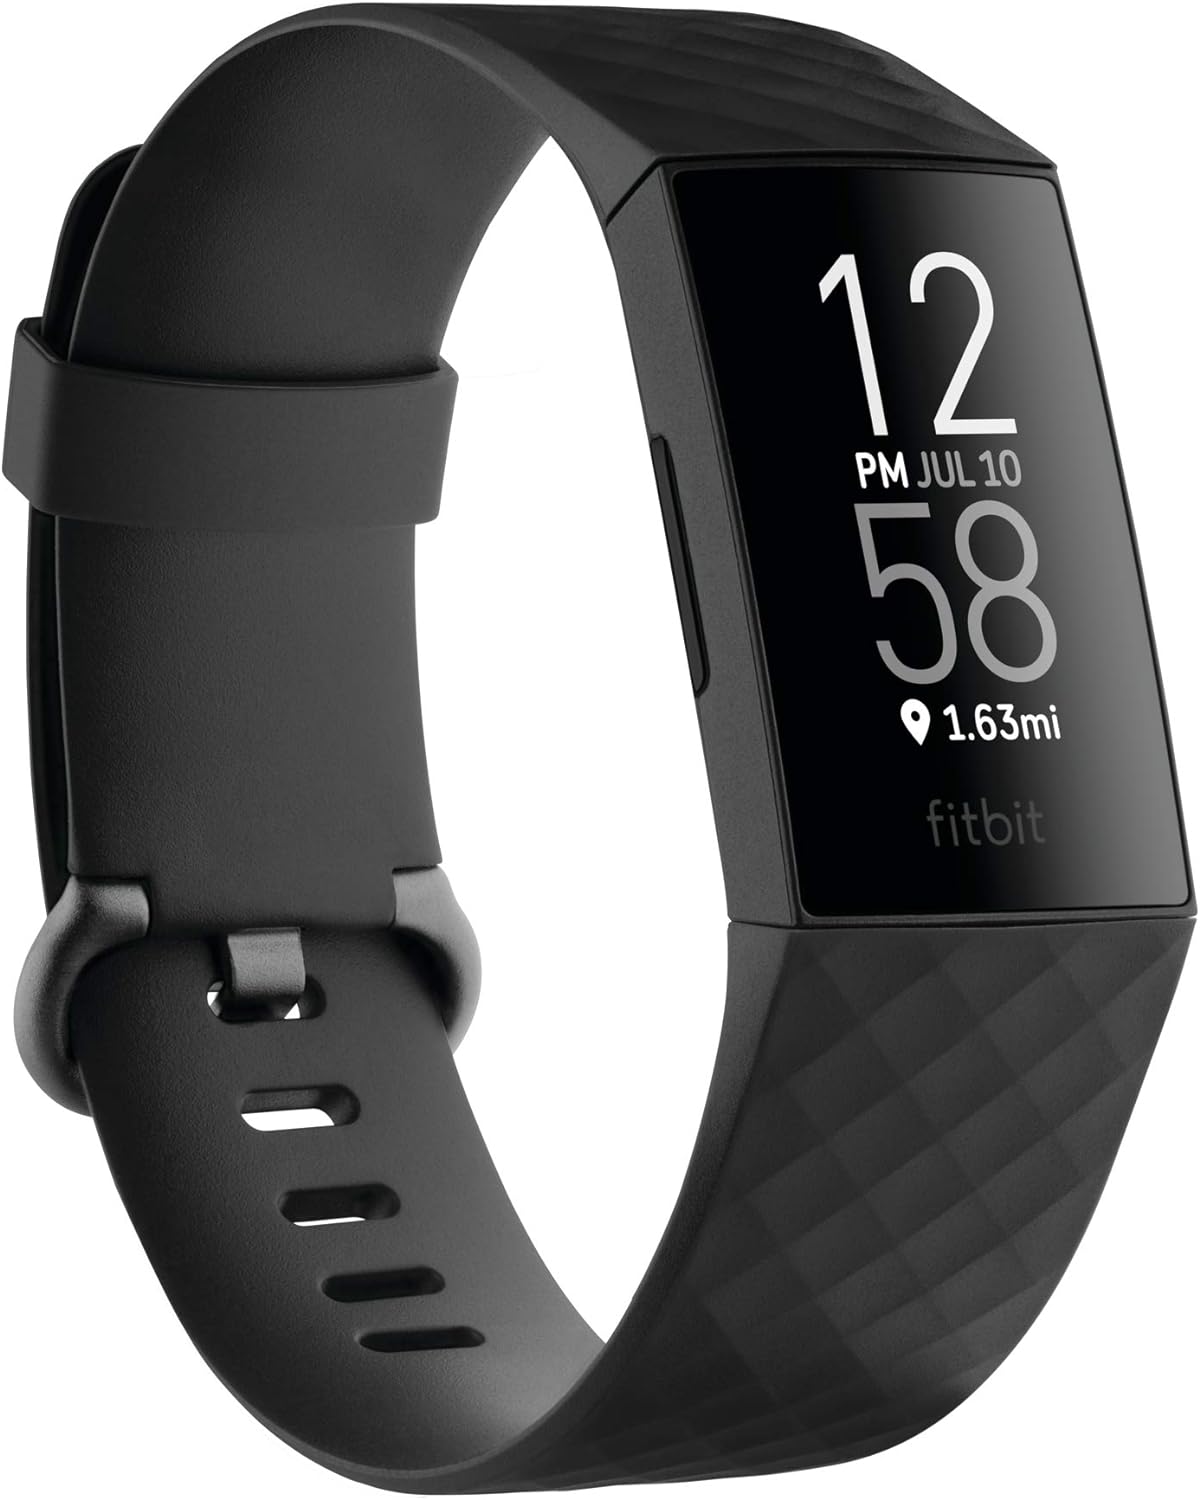 Fitness Tracker with GPS